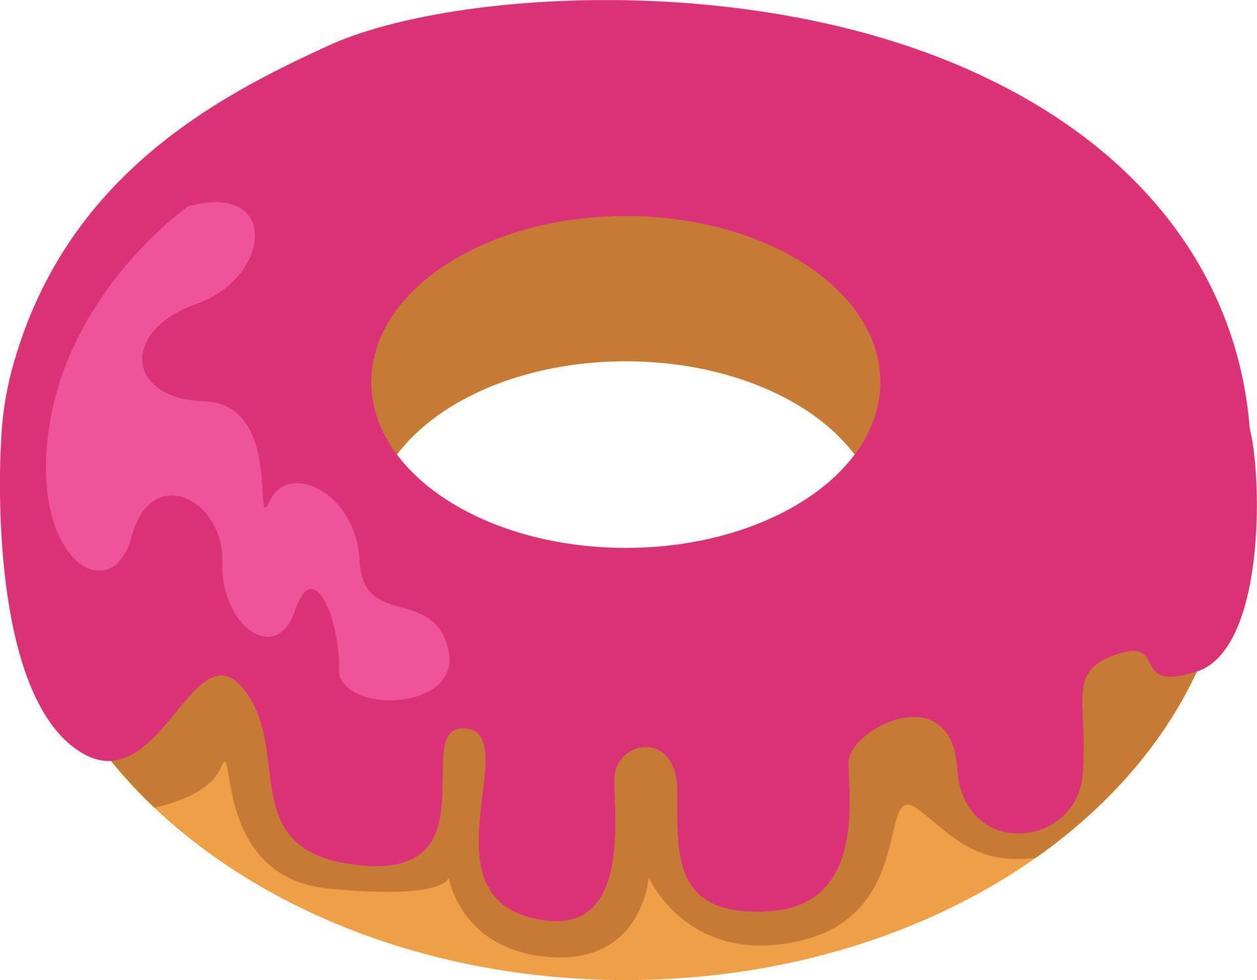 Donut with pink cream, illustration, vector on a white background